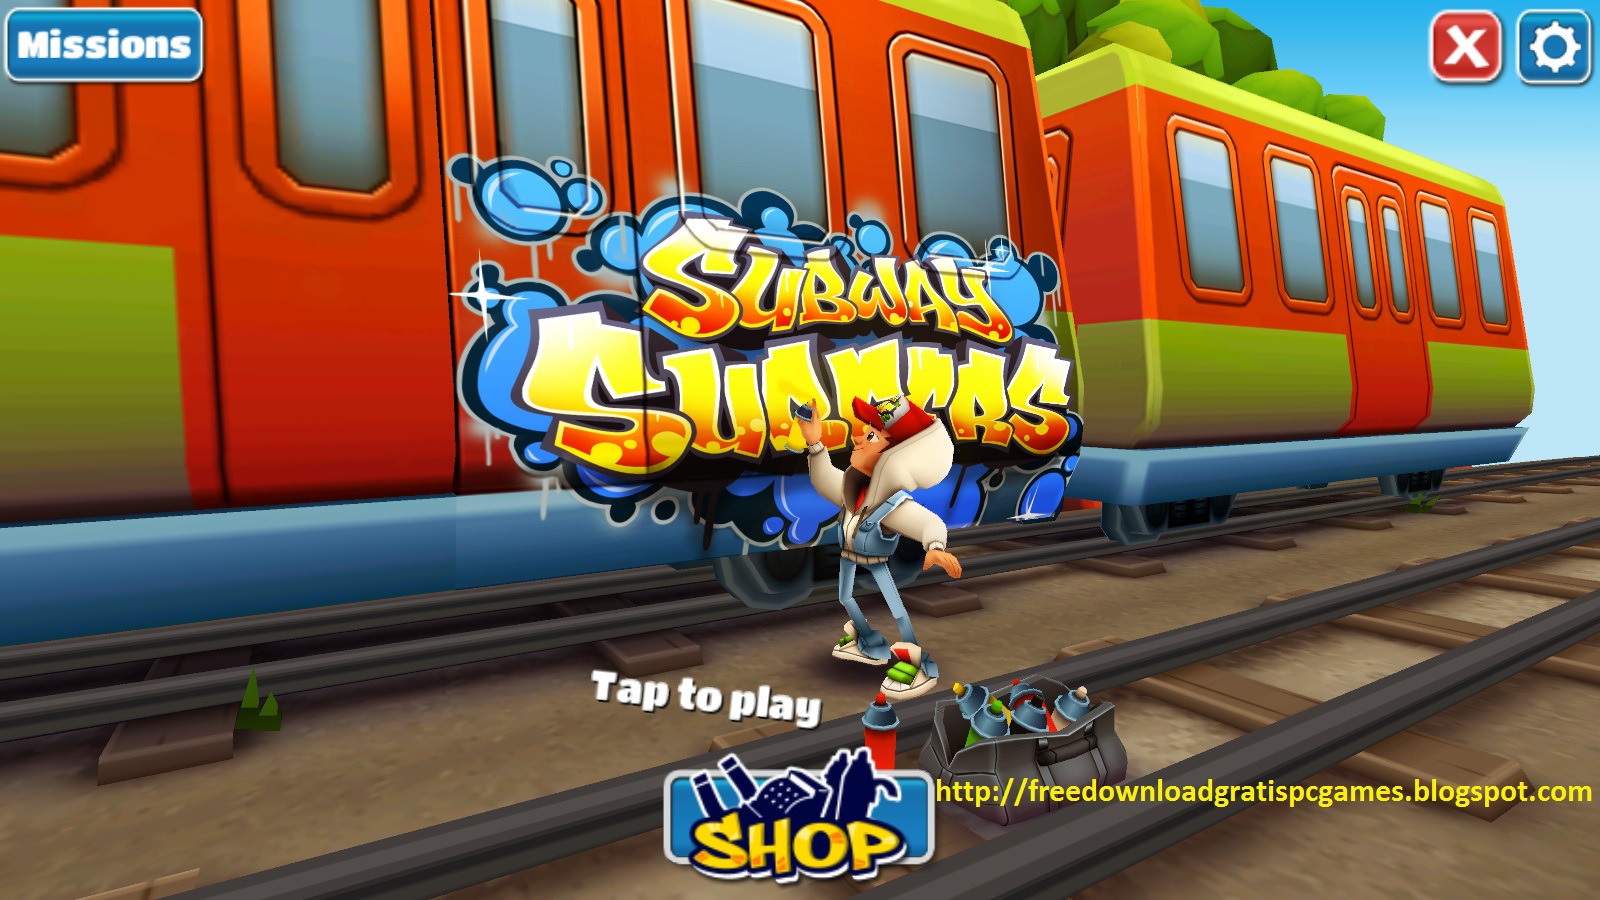 Desktop Subway Surfers keyboard (syncwithtech) : syncwithtech